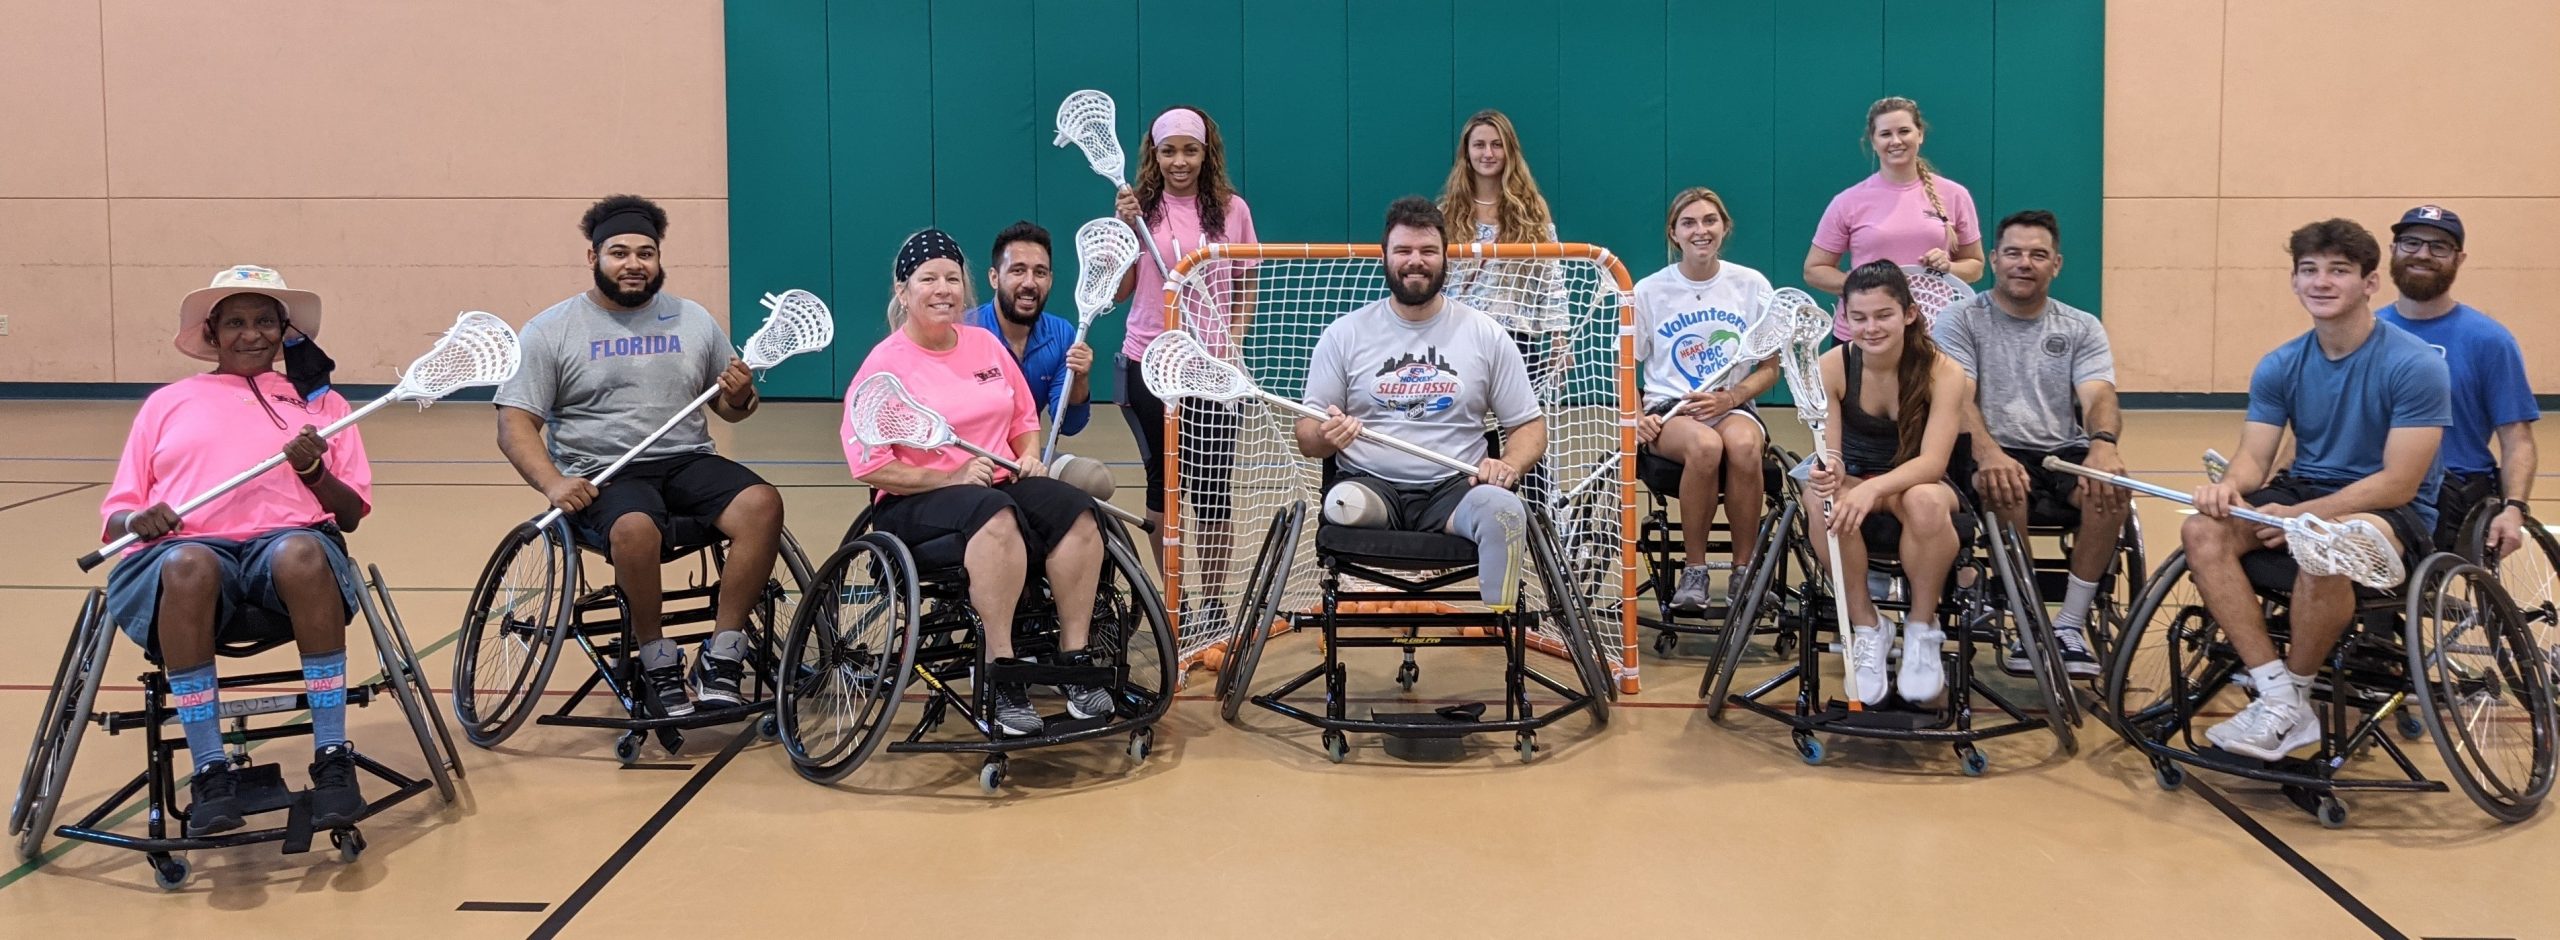 photo of people in sports wheelchairs